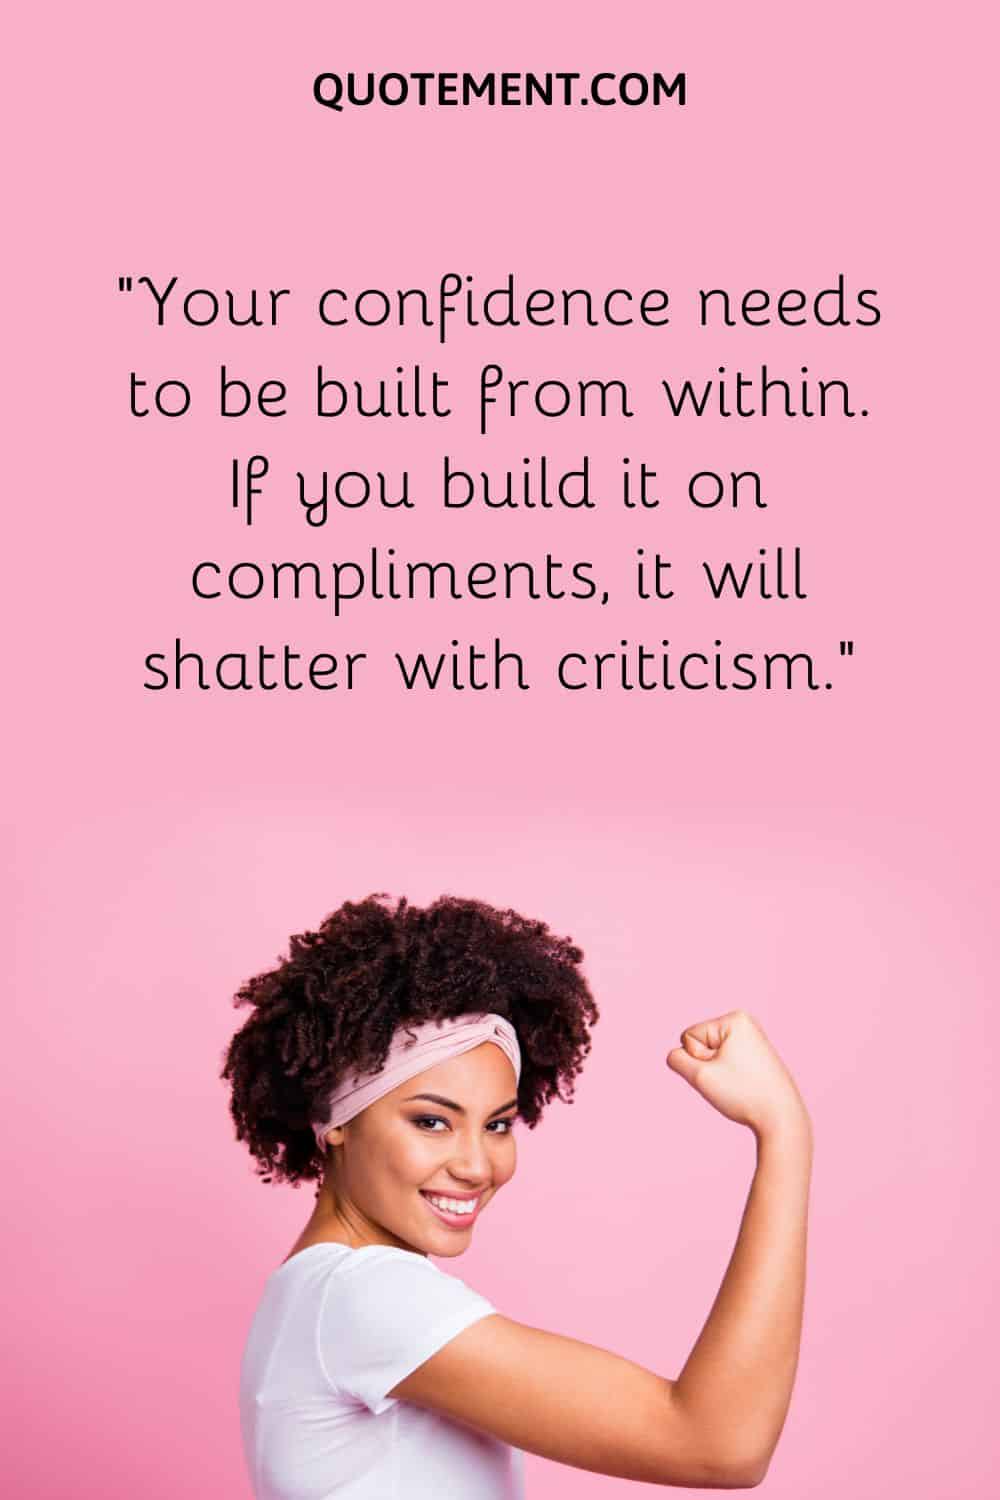 Your confidence needs to be built from within